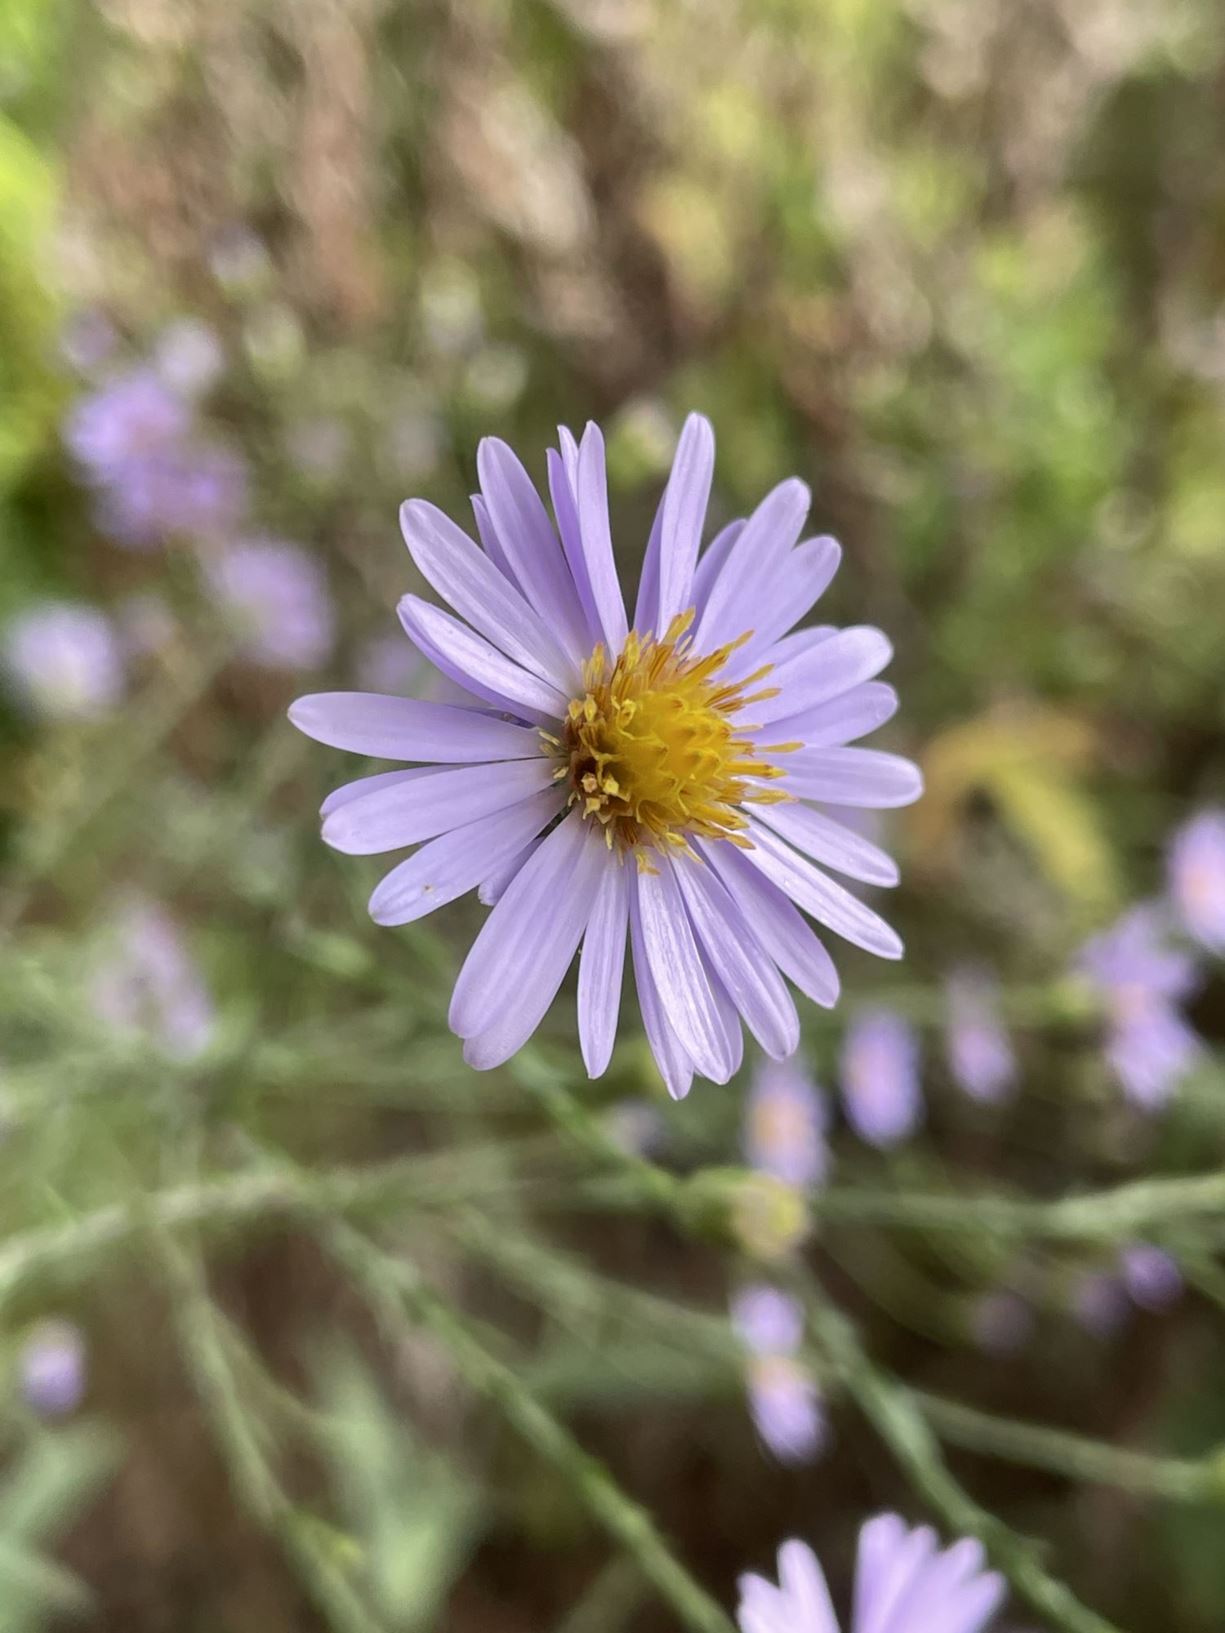 Symphyotrichum laeve - Gladde aster, smooth aster, delicate michaelmas daisy, glatte Aster